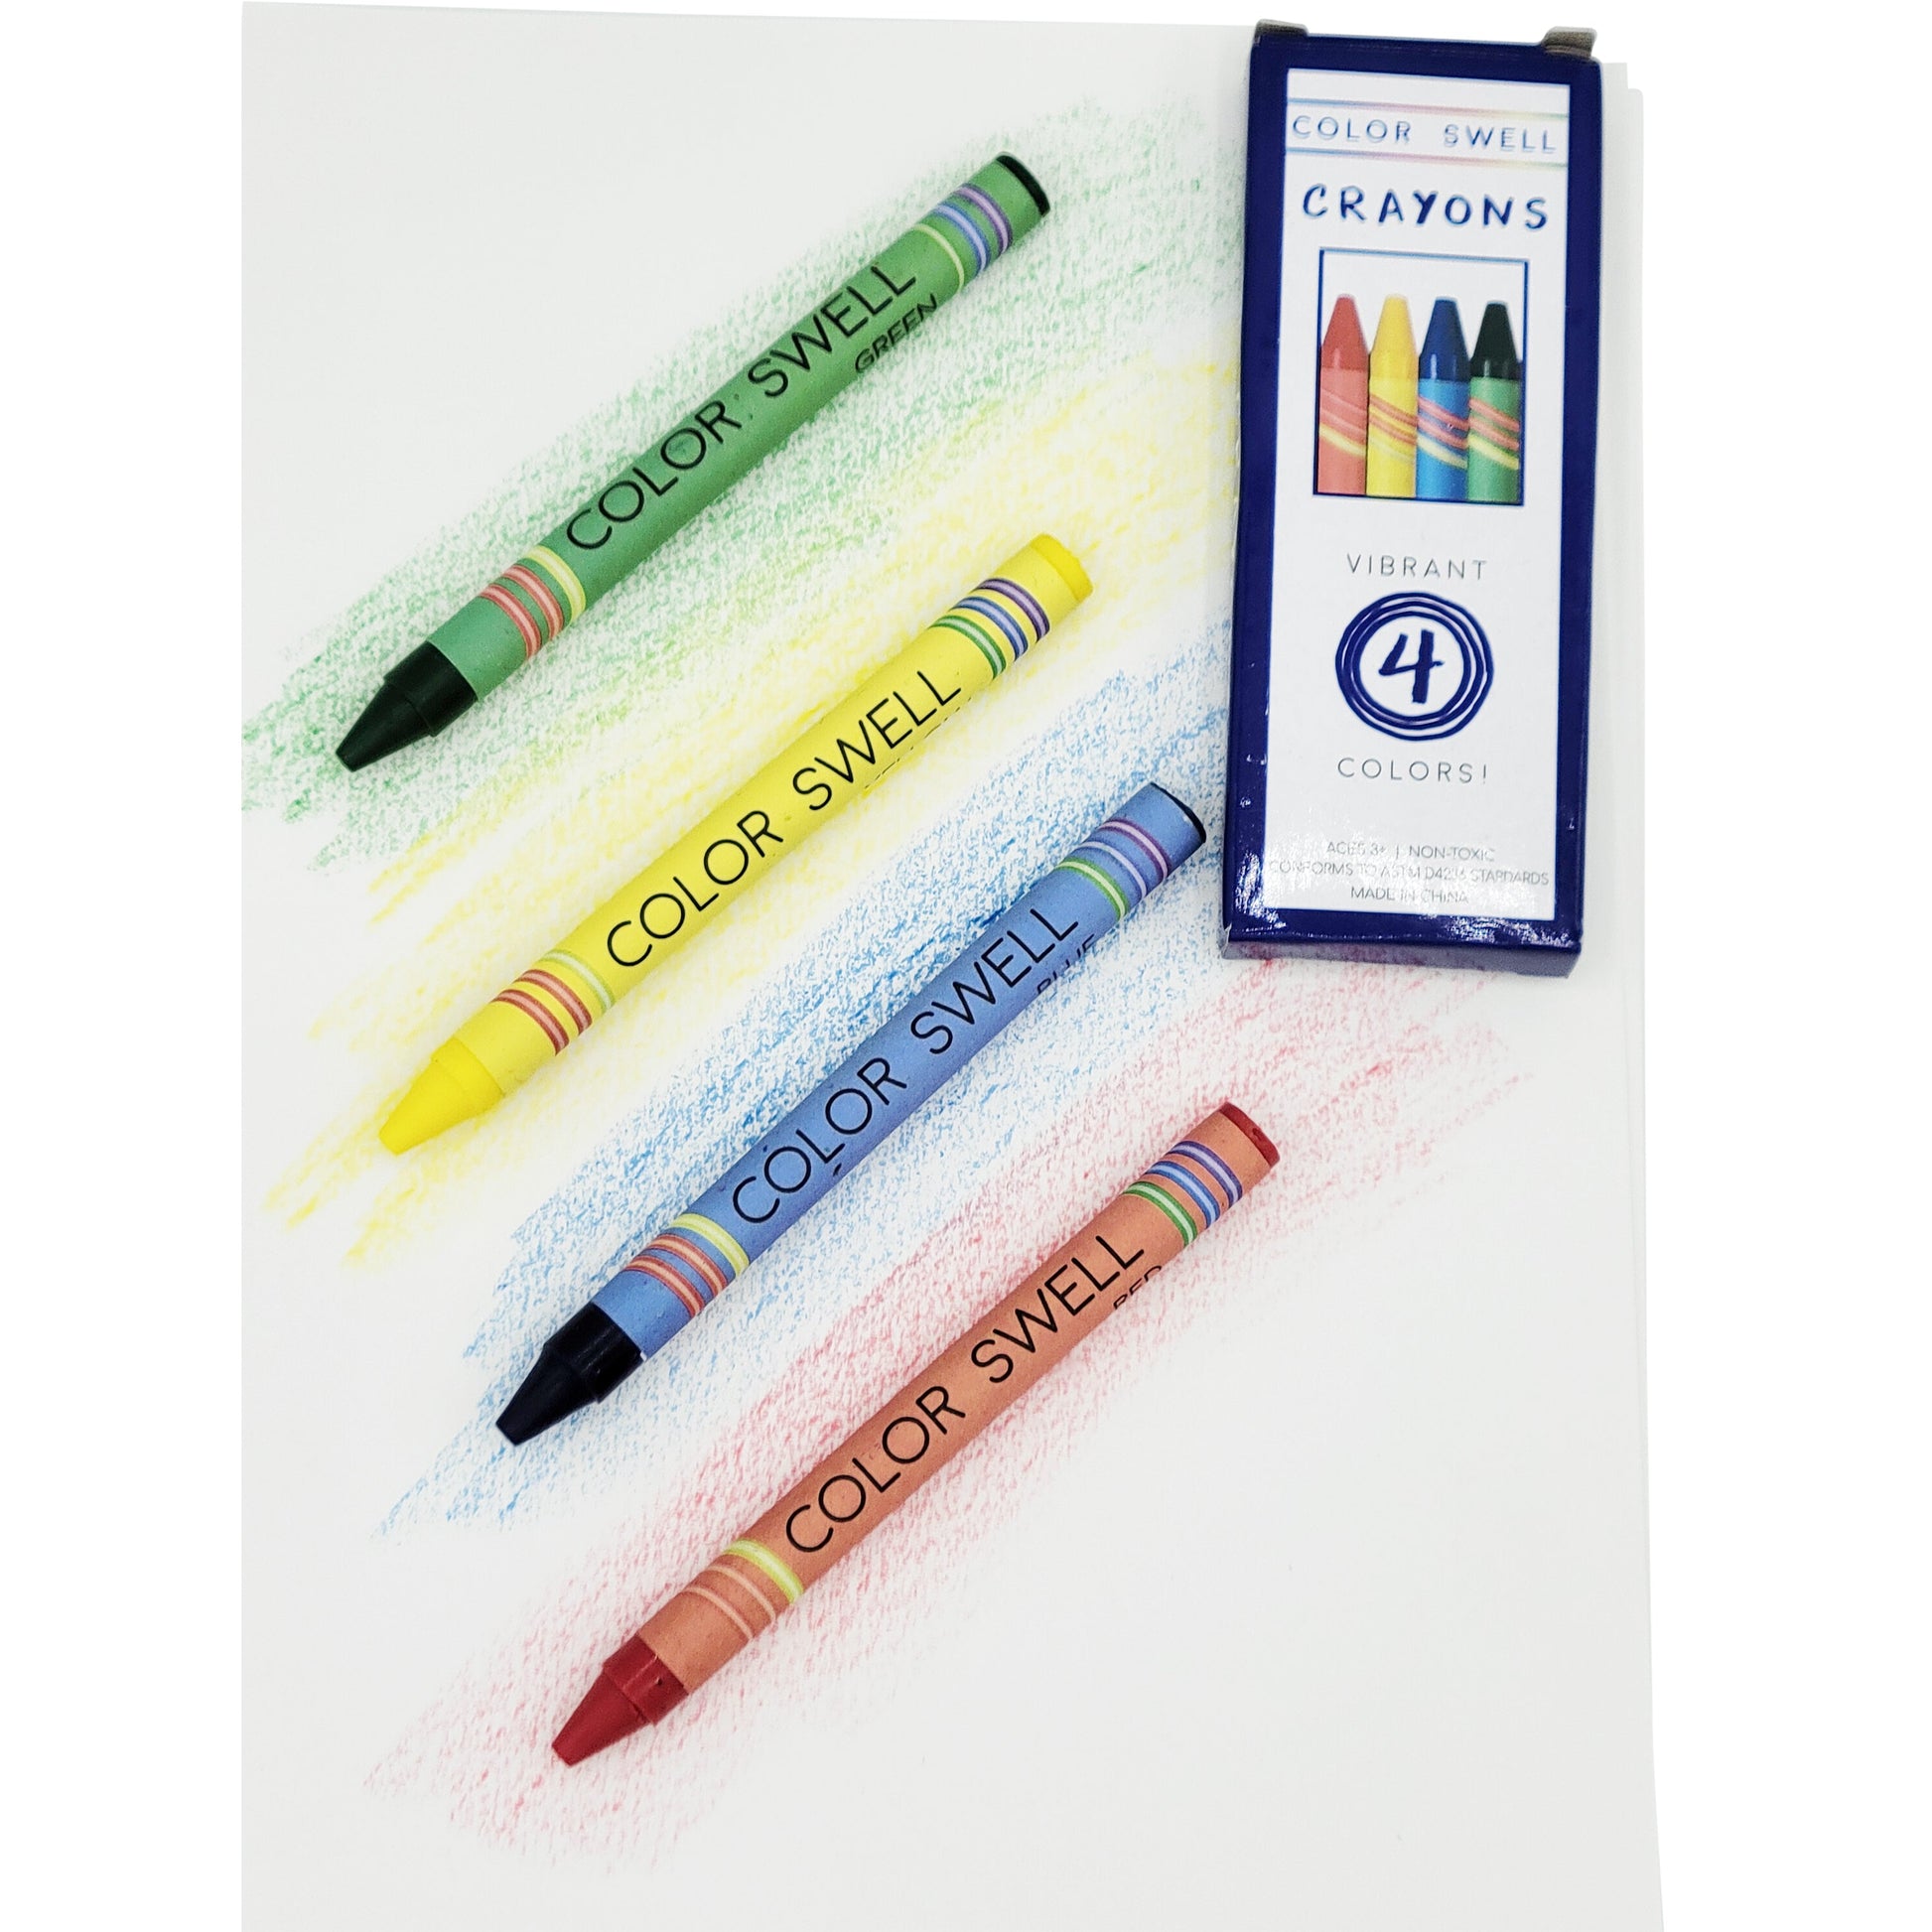 Color Swell Bulk Crayon Restaurant Packs - 300 Packs of 4 Crayons Each